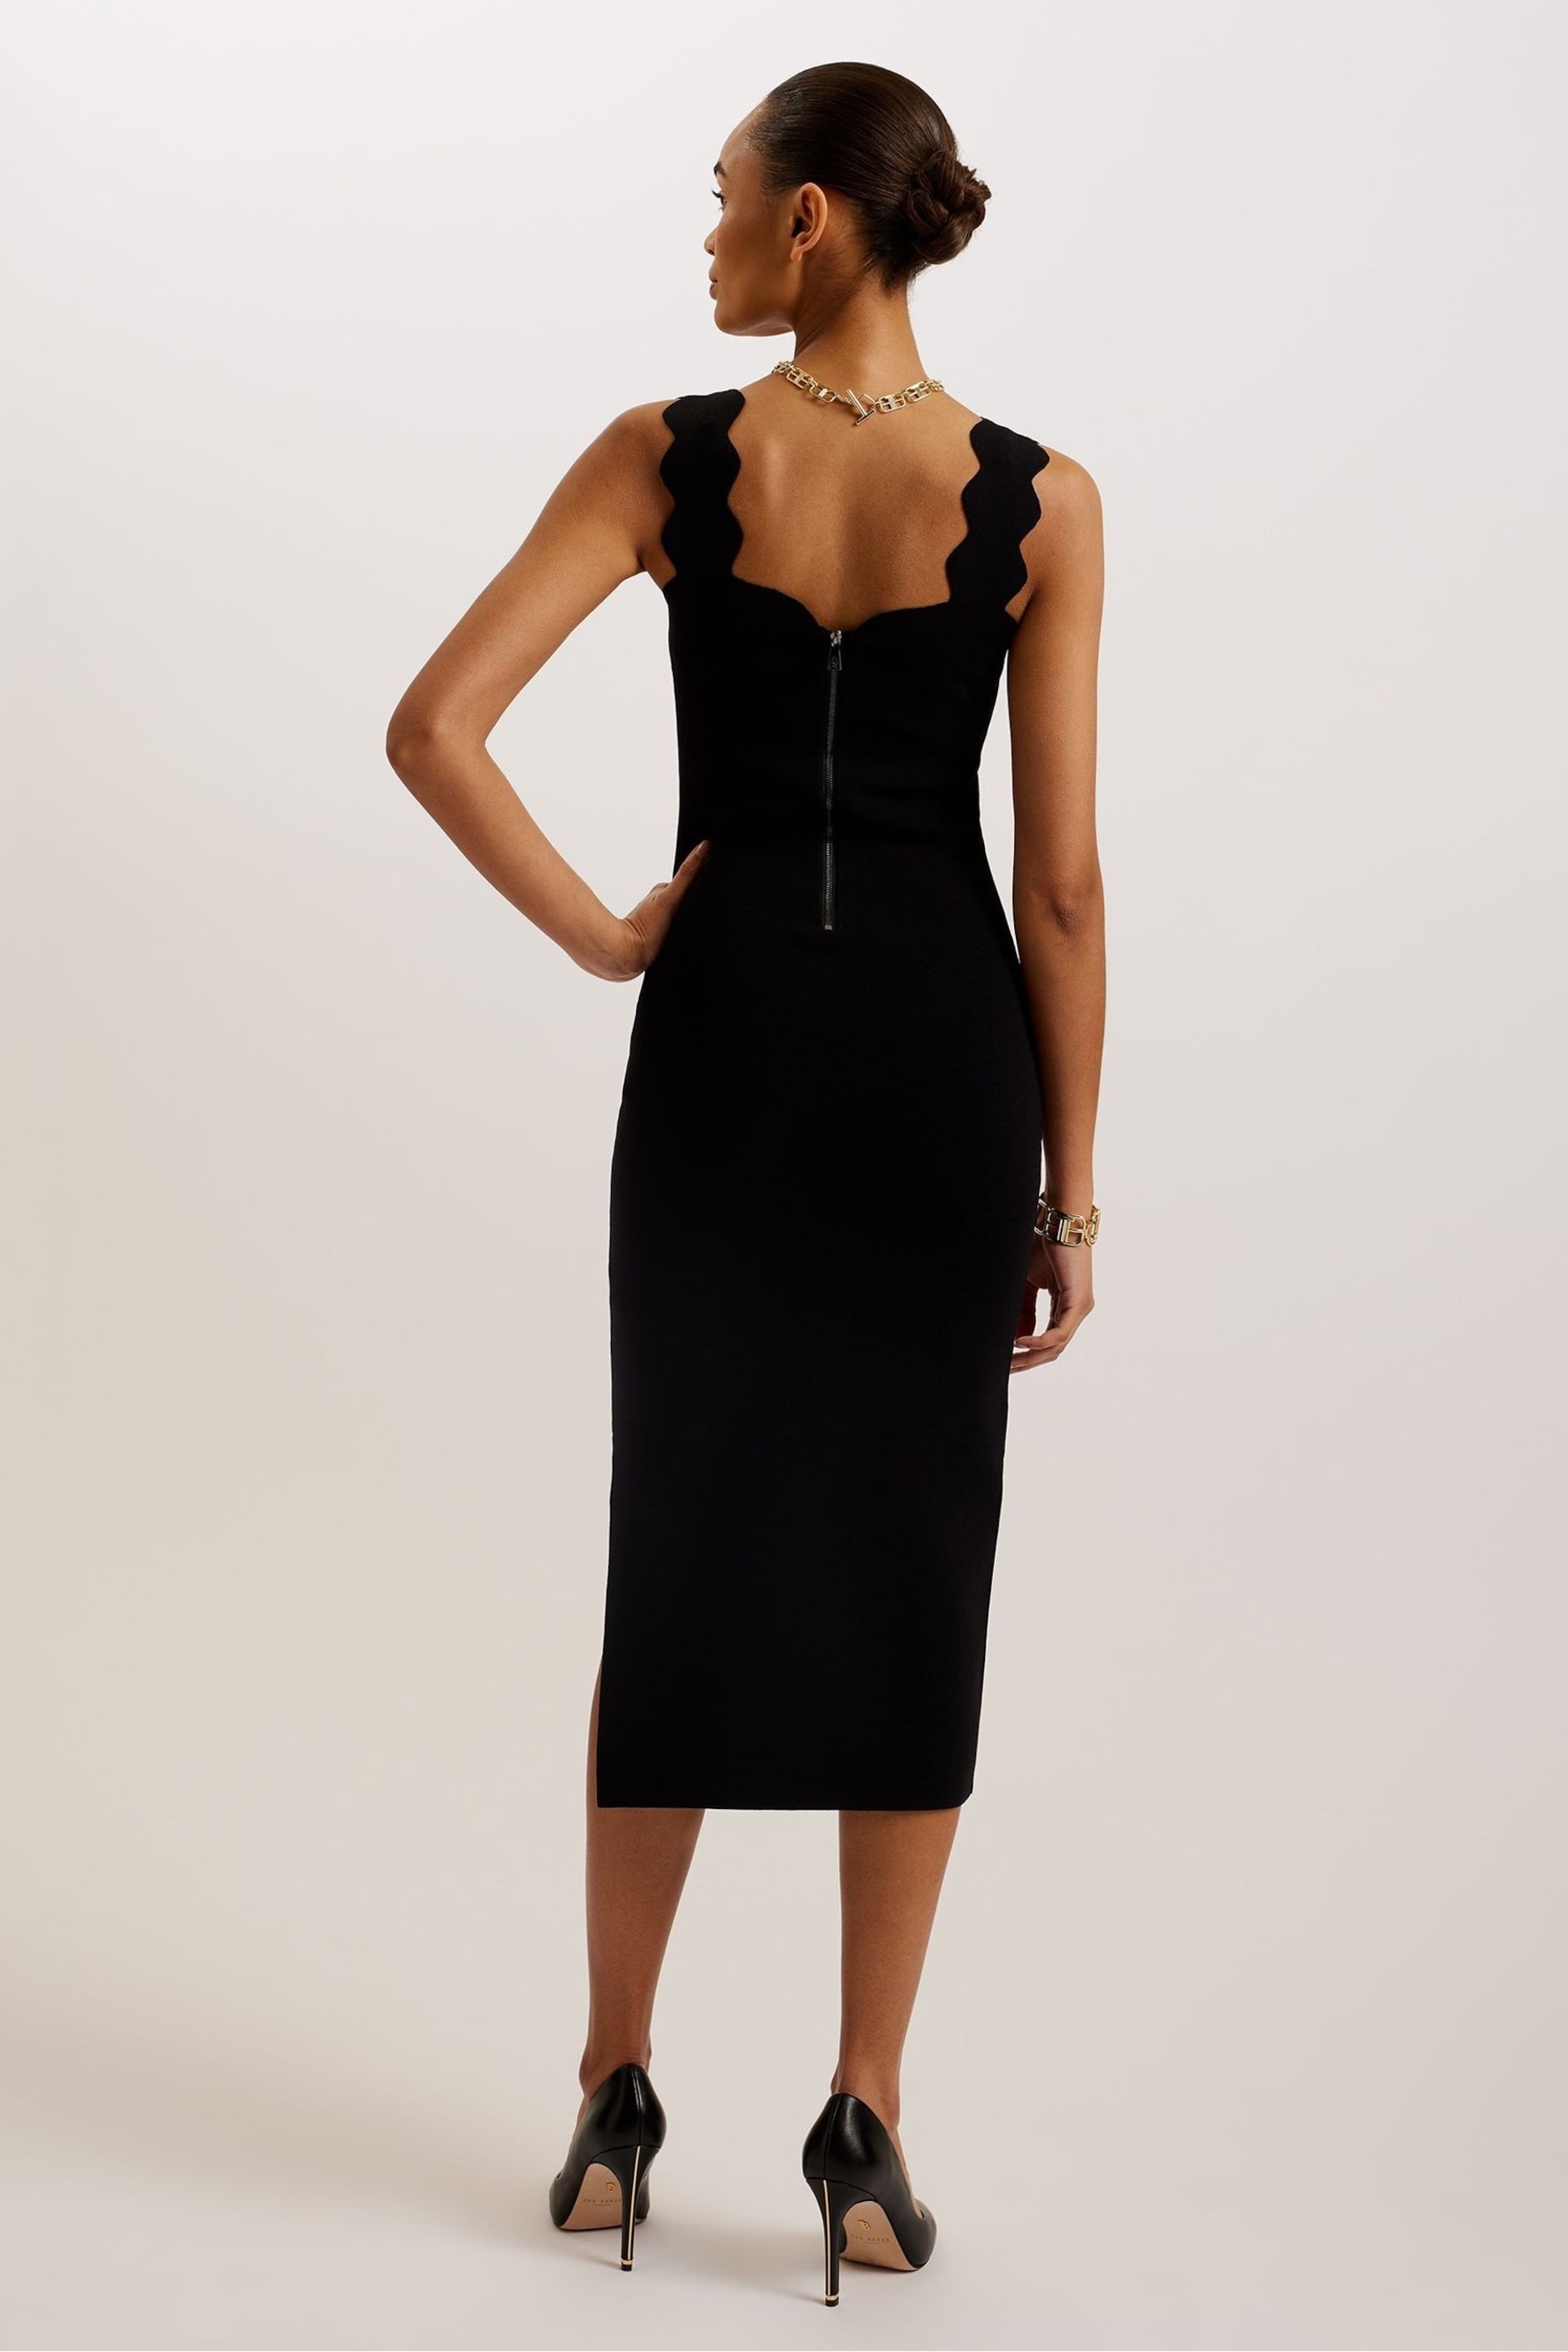 Ted Baker Black Sharmay Scallop Detail Bodycon Dress - Image 2 of 5